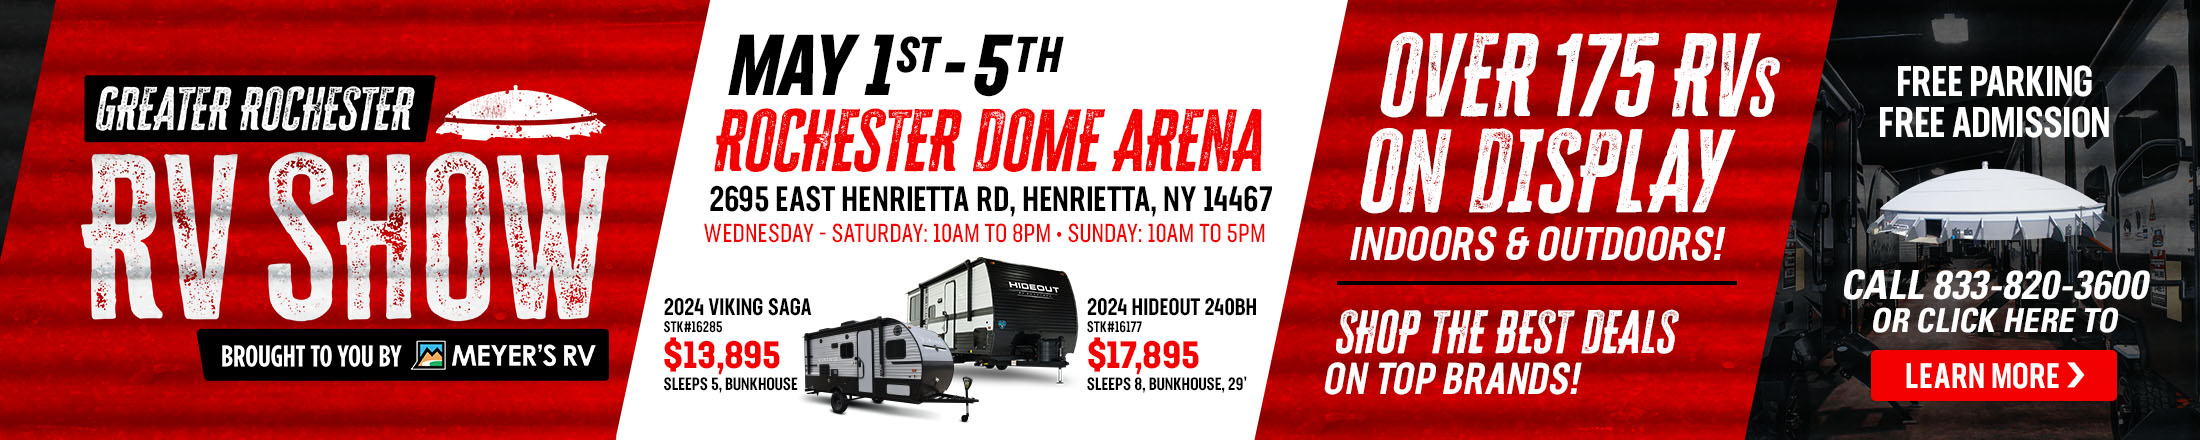 Greater Rochester Dome Show